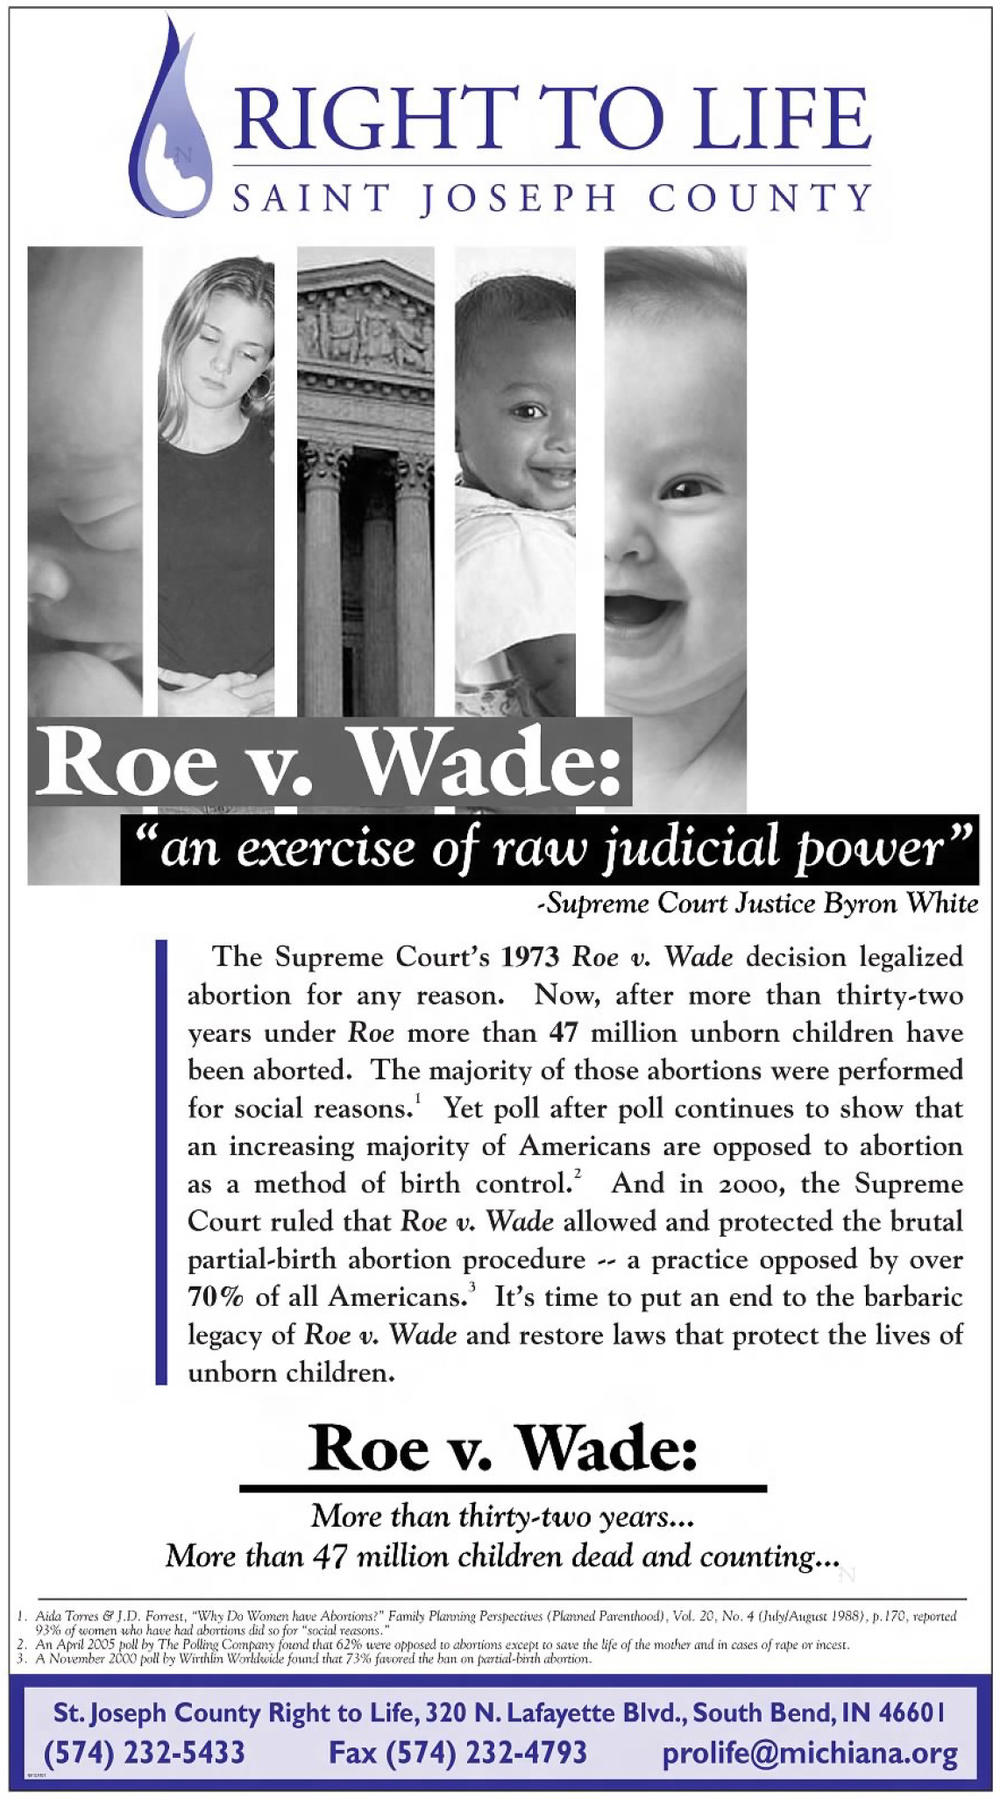 Sen. Tammy Duckworth, a Democrat, is asking Republicans to reconsider support for Barrett after this 2006 newspaper ad from an anti-abortion-rights group surfaced with Barrett's name attached.